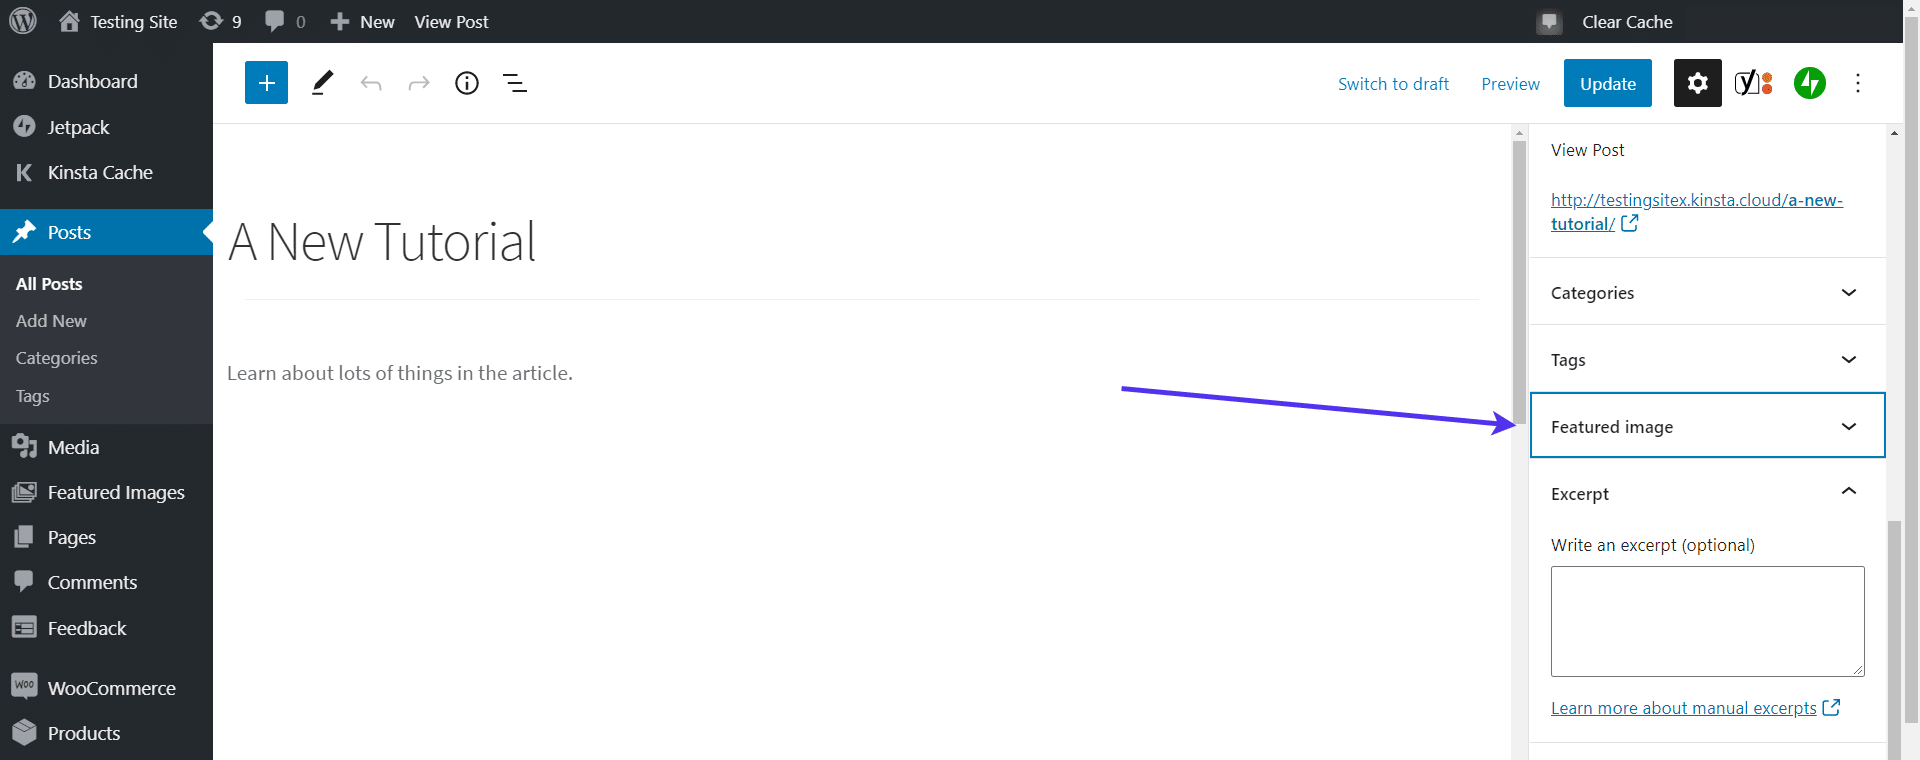 WordPress featured image not showing properly